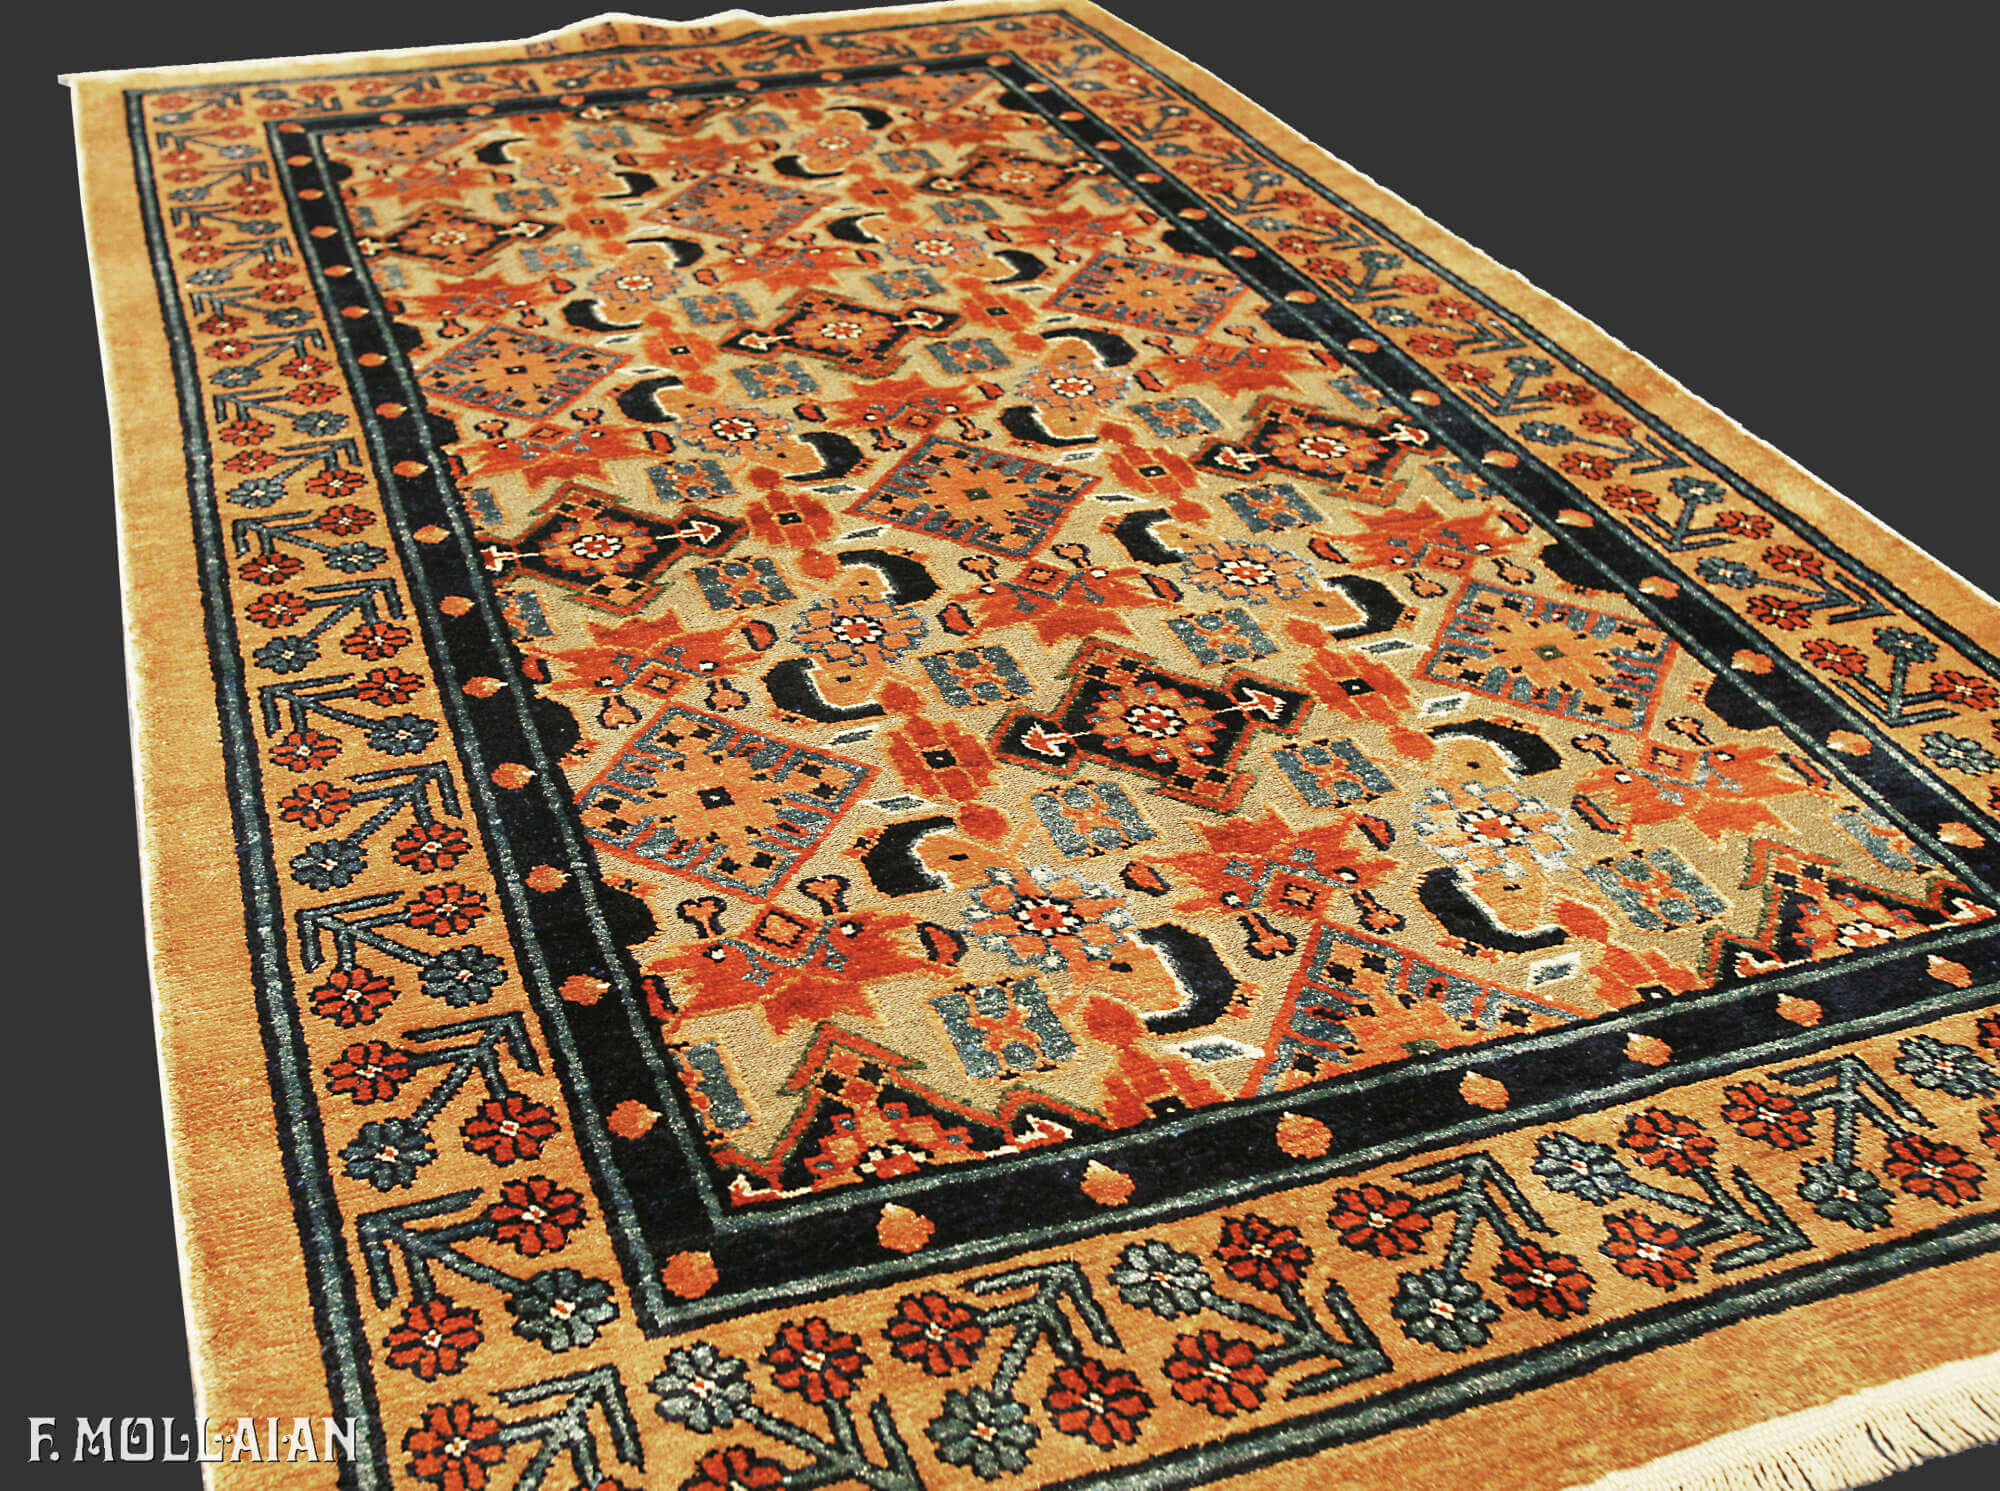 A Rare Antique Imperial Palace Chinese Silk & Metal Rug n°:79466225